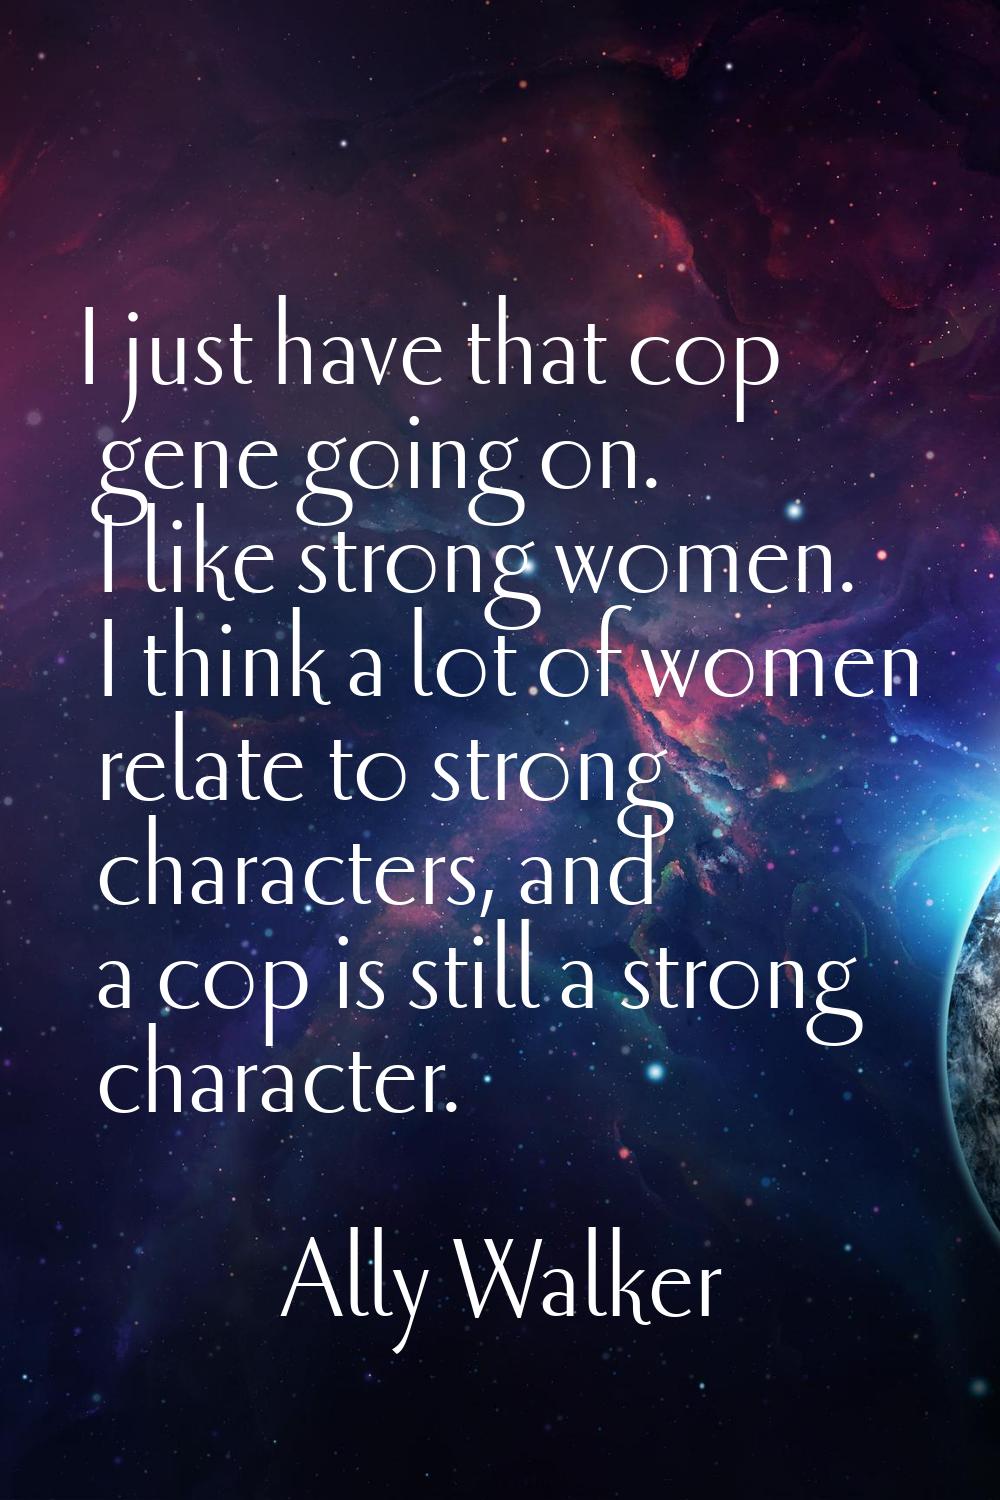 I just have that cop gene going on. I like strong women. I think a lot of women relate to strong ch